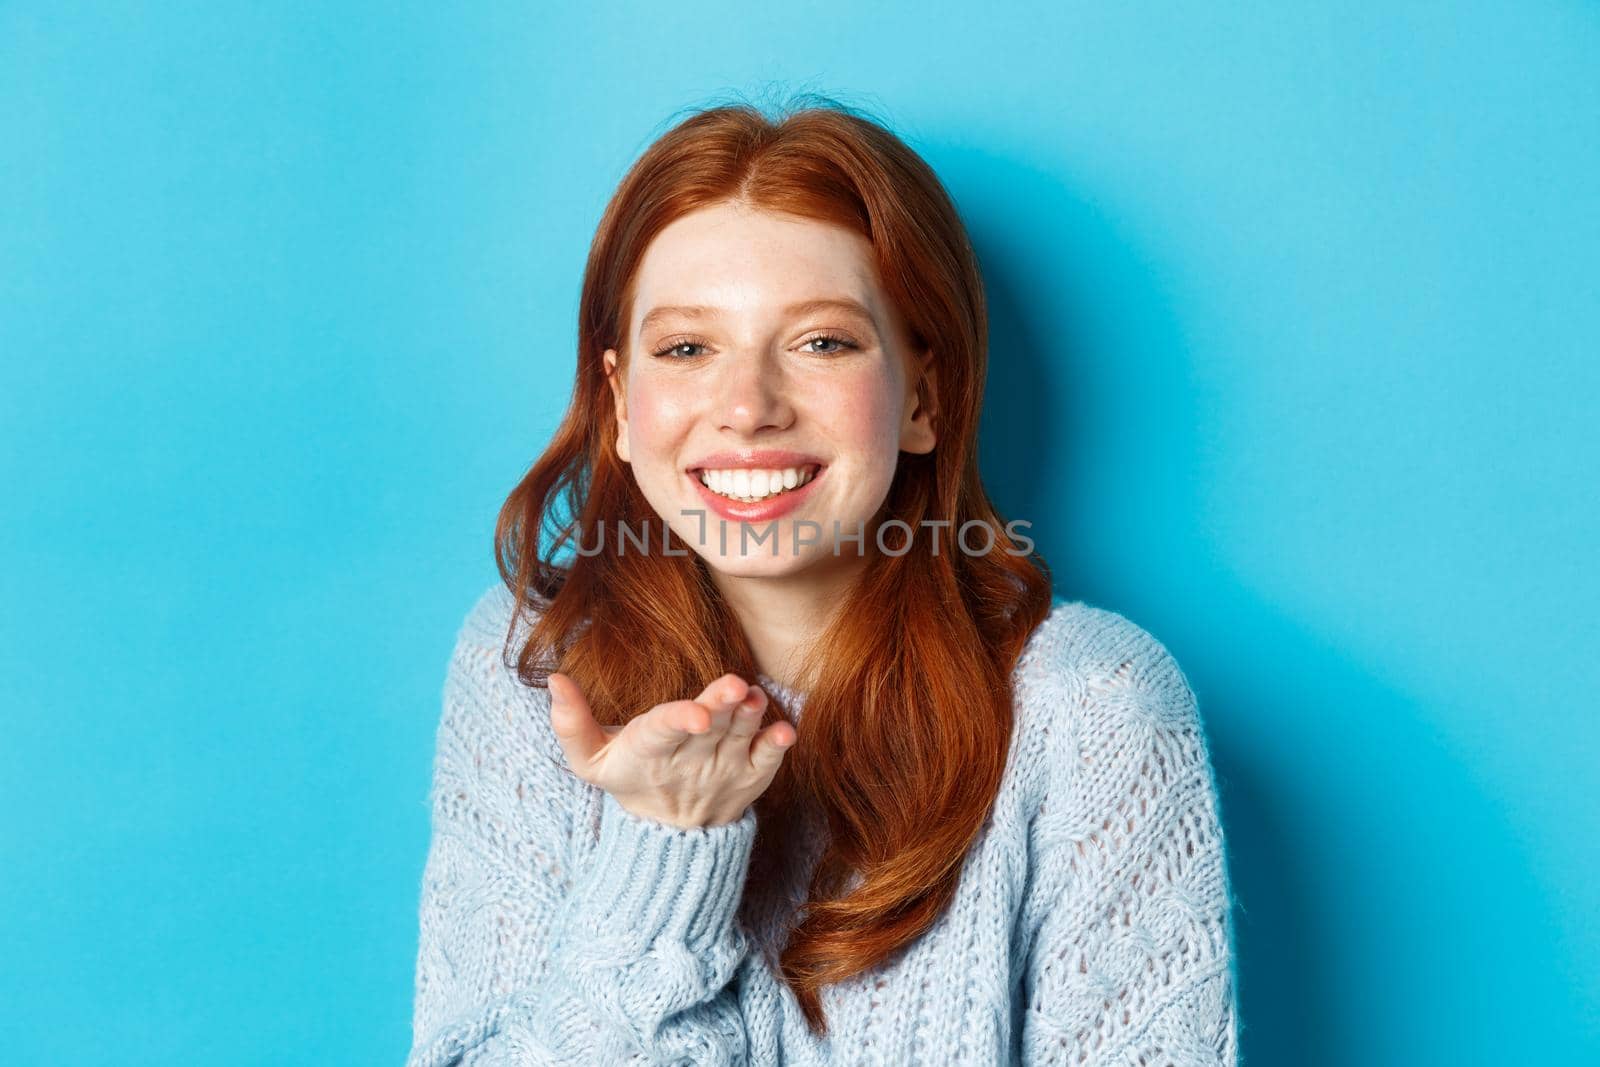 Lovely redhead female model smiling, sending air kiss at camera, standing against blue background.